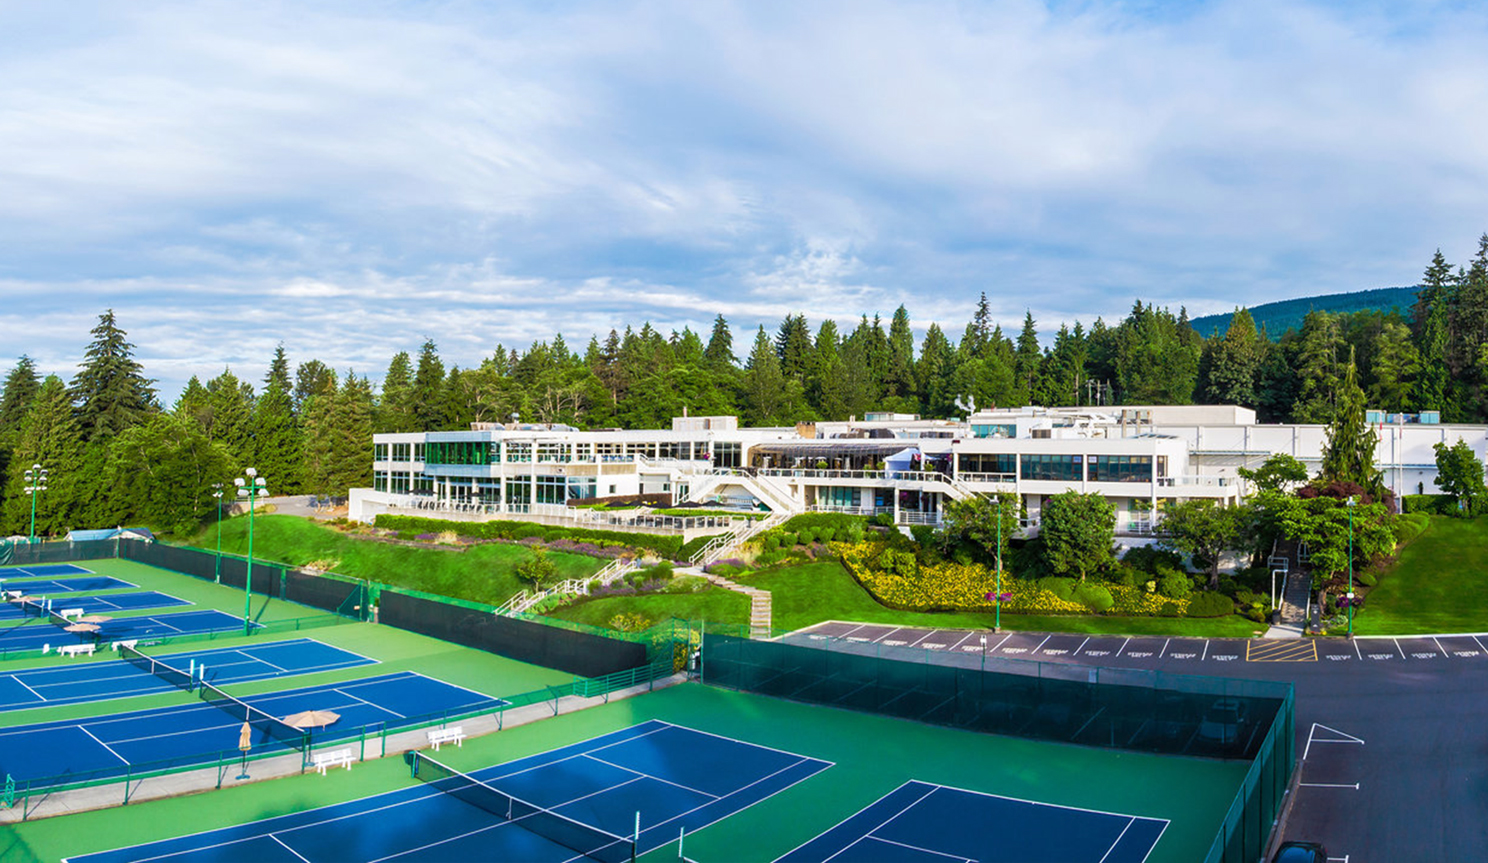 Wide-angle view of Hollyburn Country Club, which has eight tennis courts in front of this long white building.